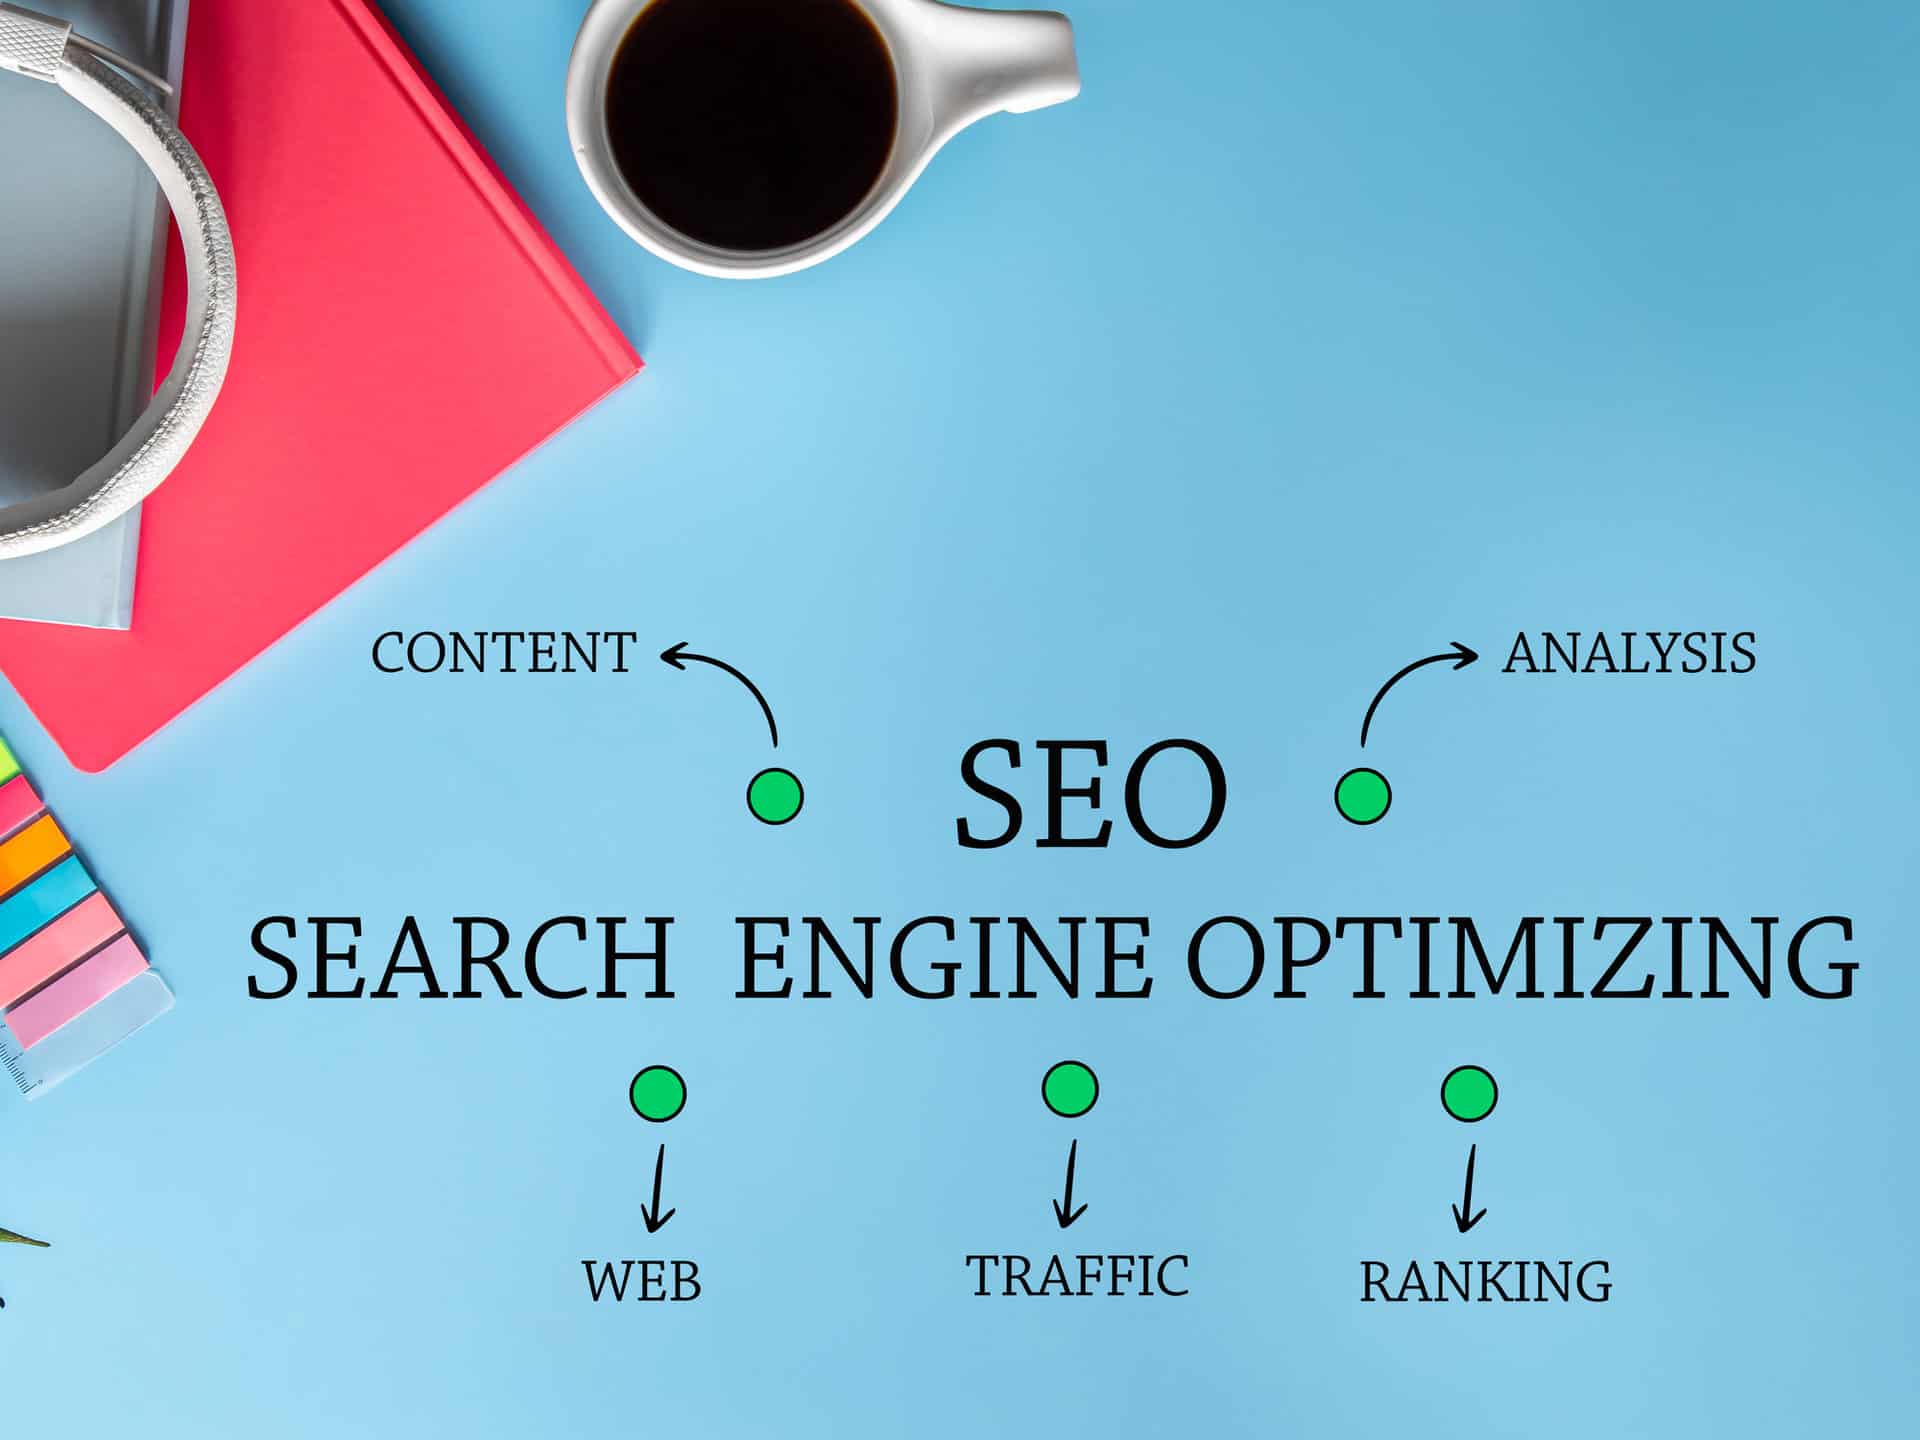 SEO outsourcing